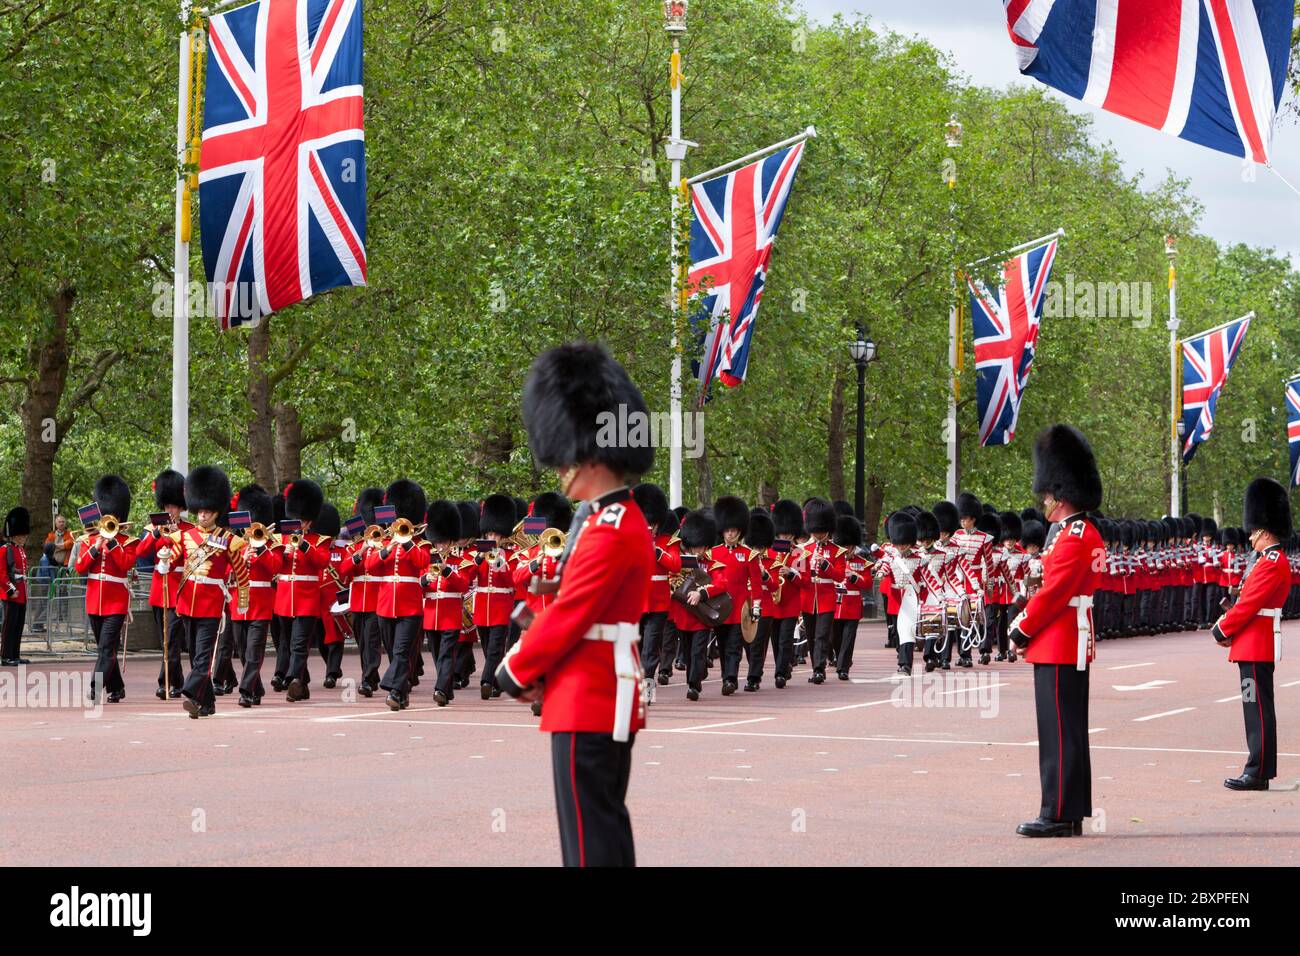 Band of the Coldstream Guards marching along The Mall, London, United Kingdom Stock Photo